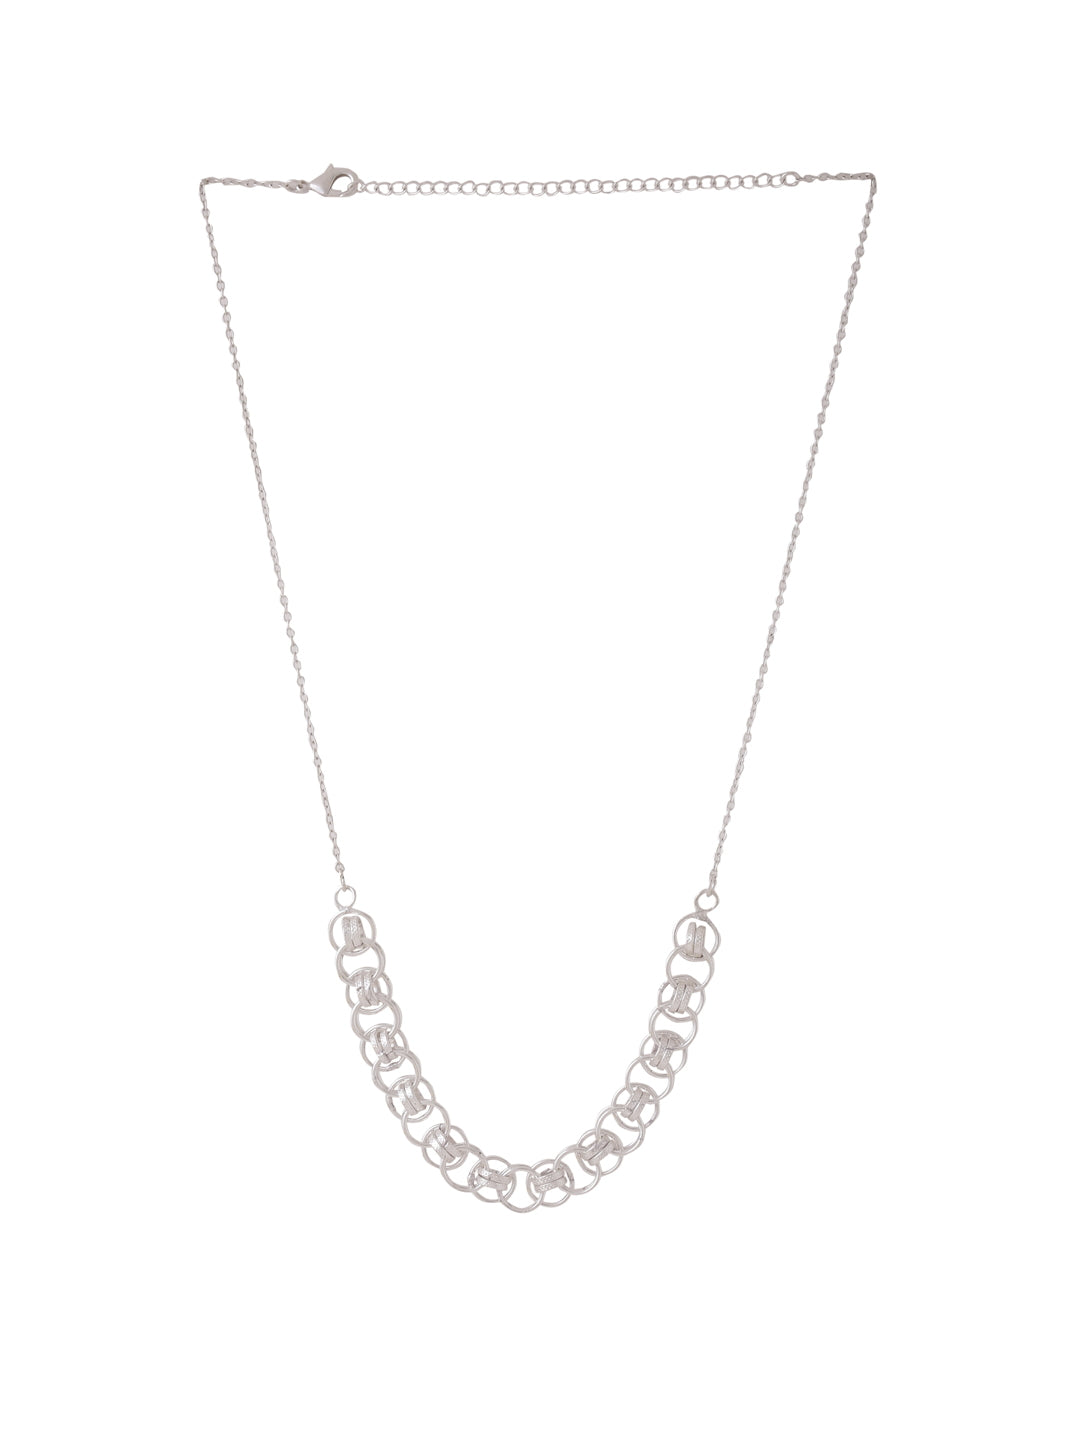 Stylish Silver Plated Chain Necklace-Viraasi